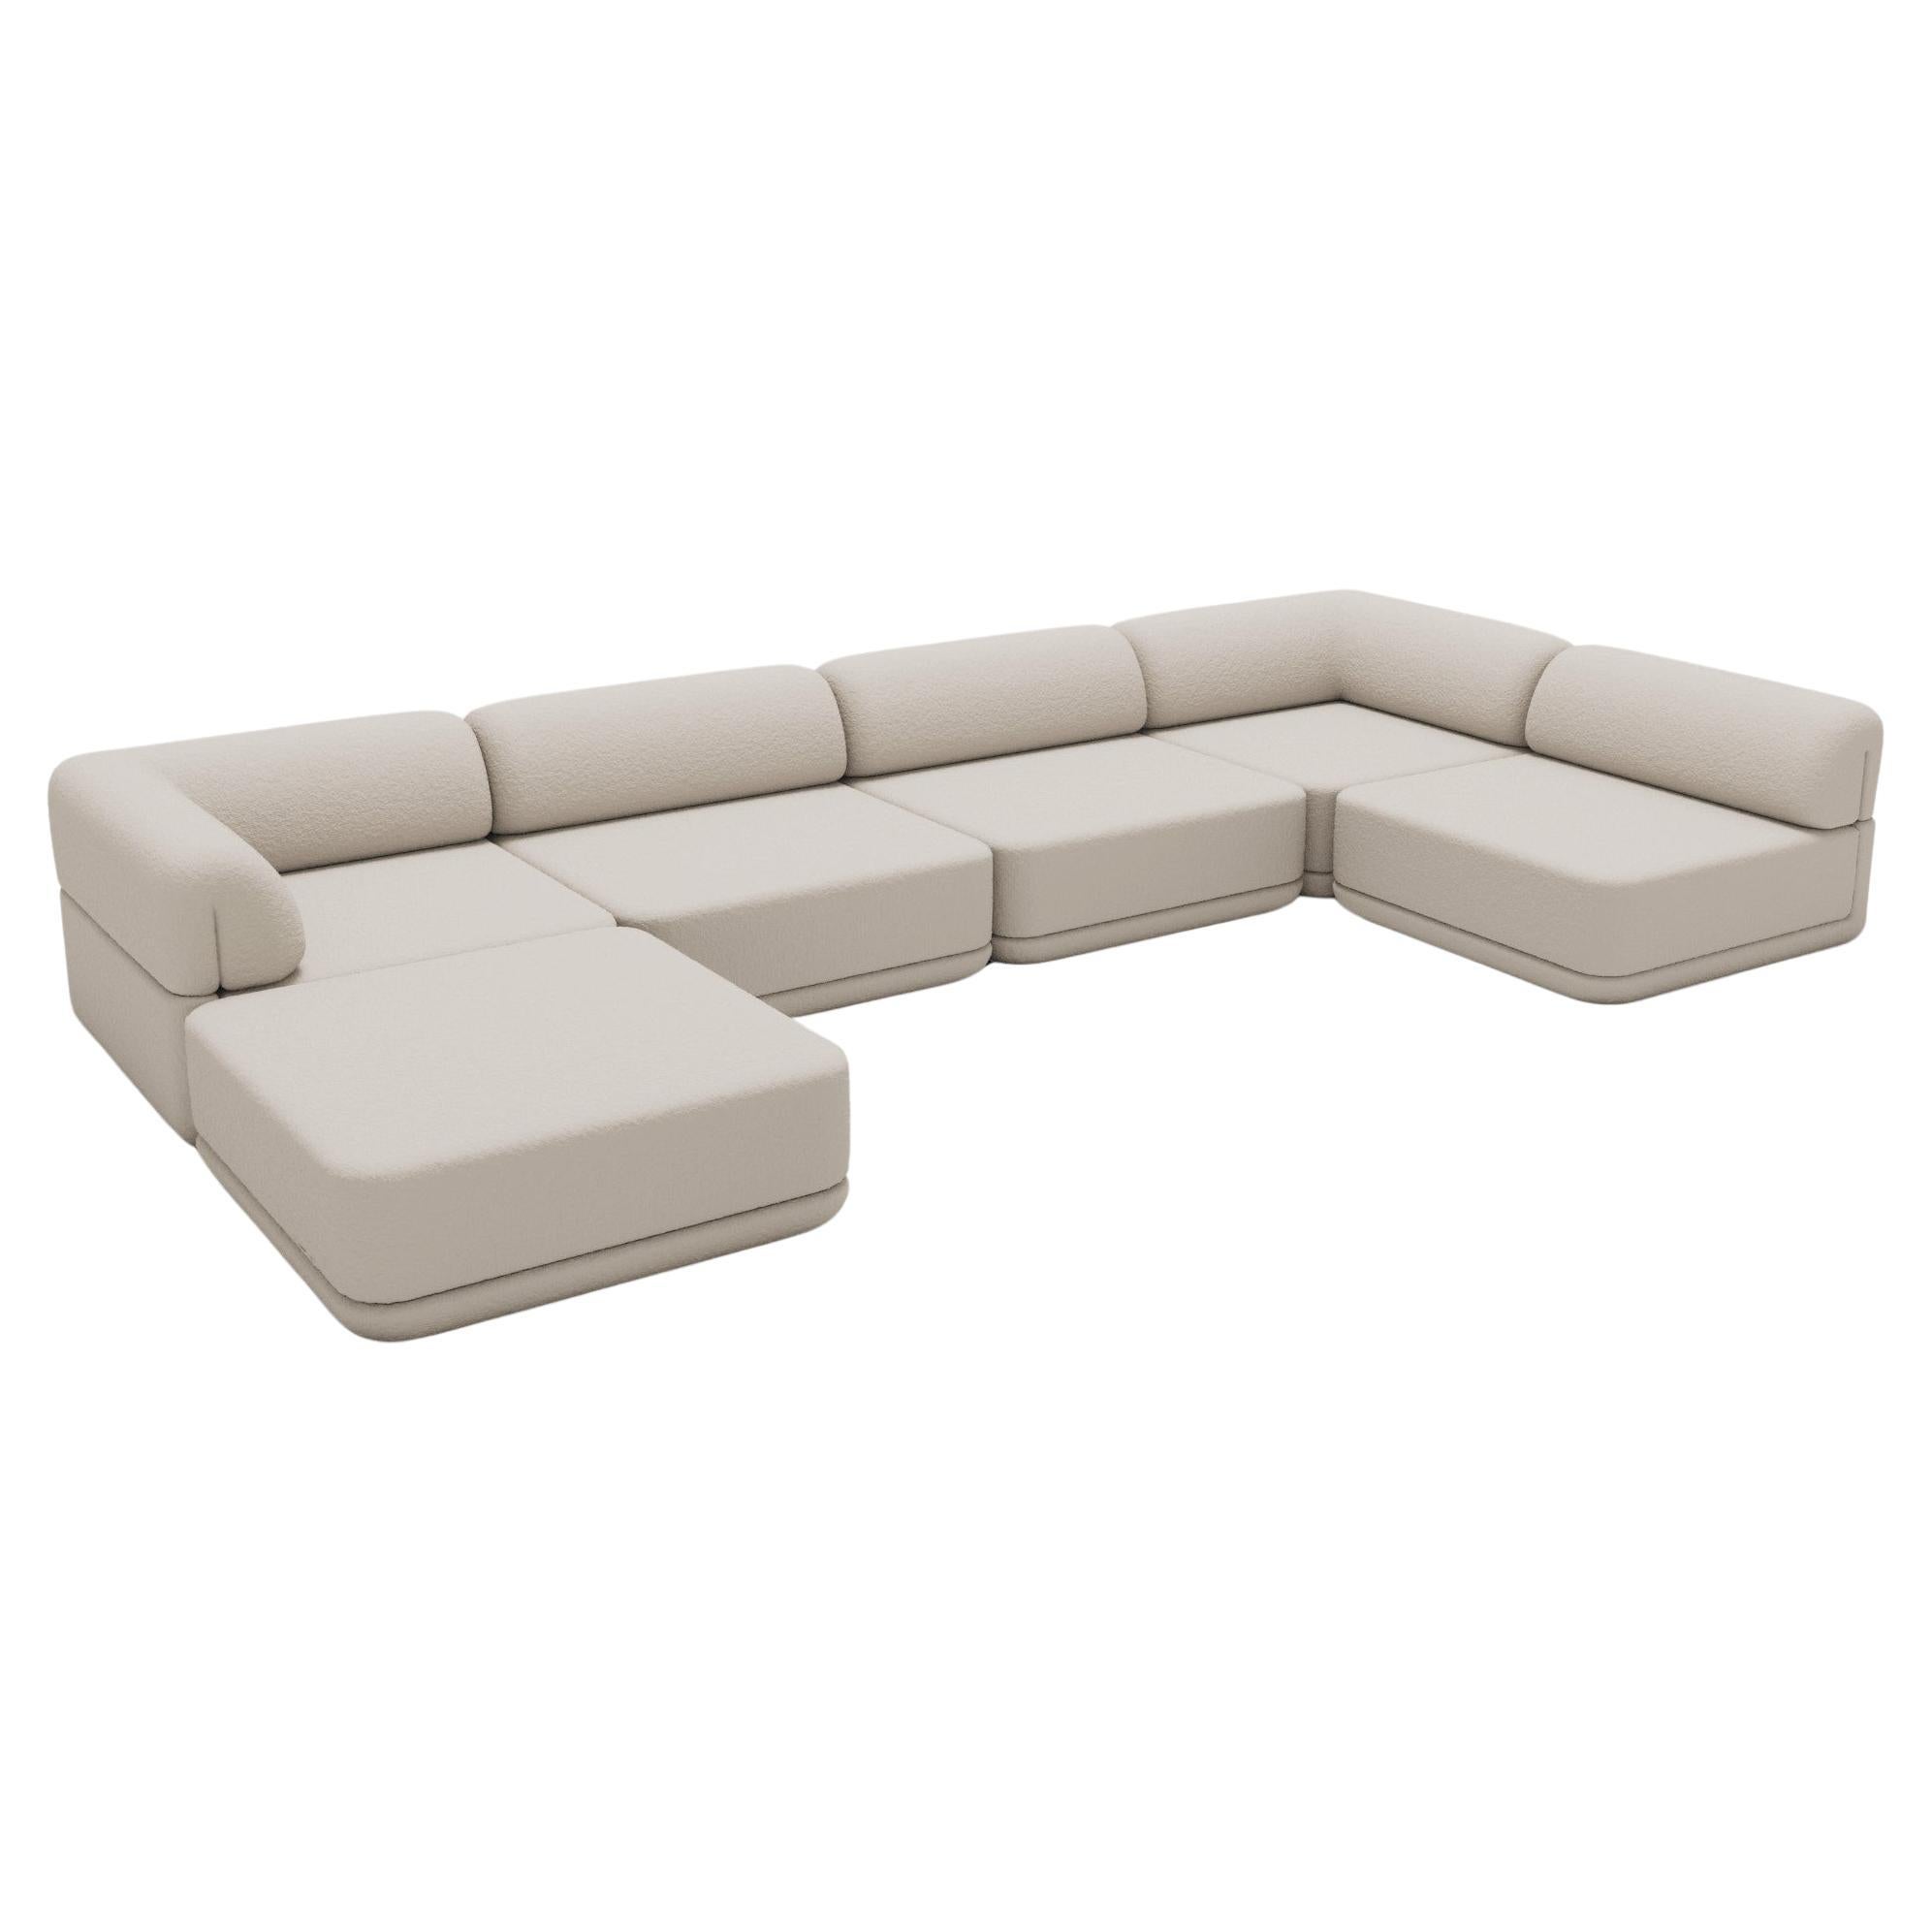 Low Lounge Sectional - Inspired by 70s Italian Luxury Furniture

Discover The Cube Sofa, where art meets adaptability. Its sculptural design and customizable comfort create endless possibilities for your living space. Make a statement, elevate your